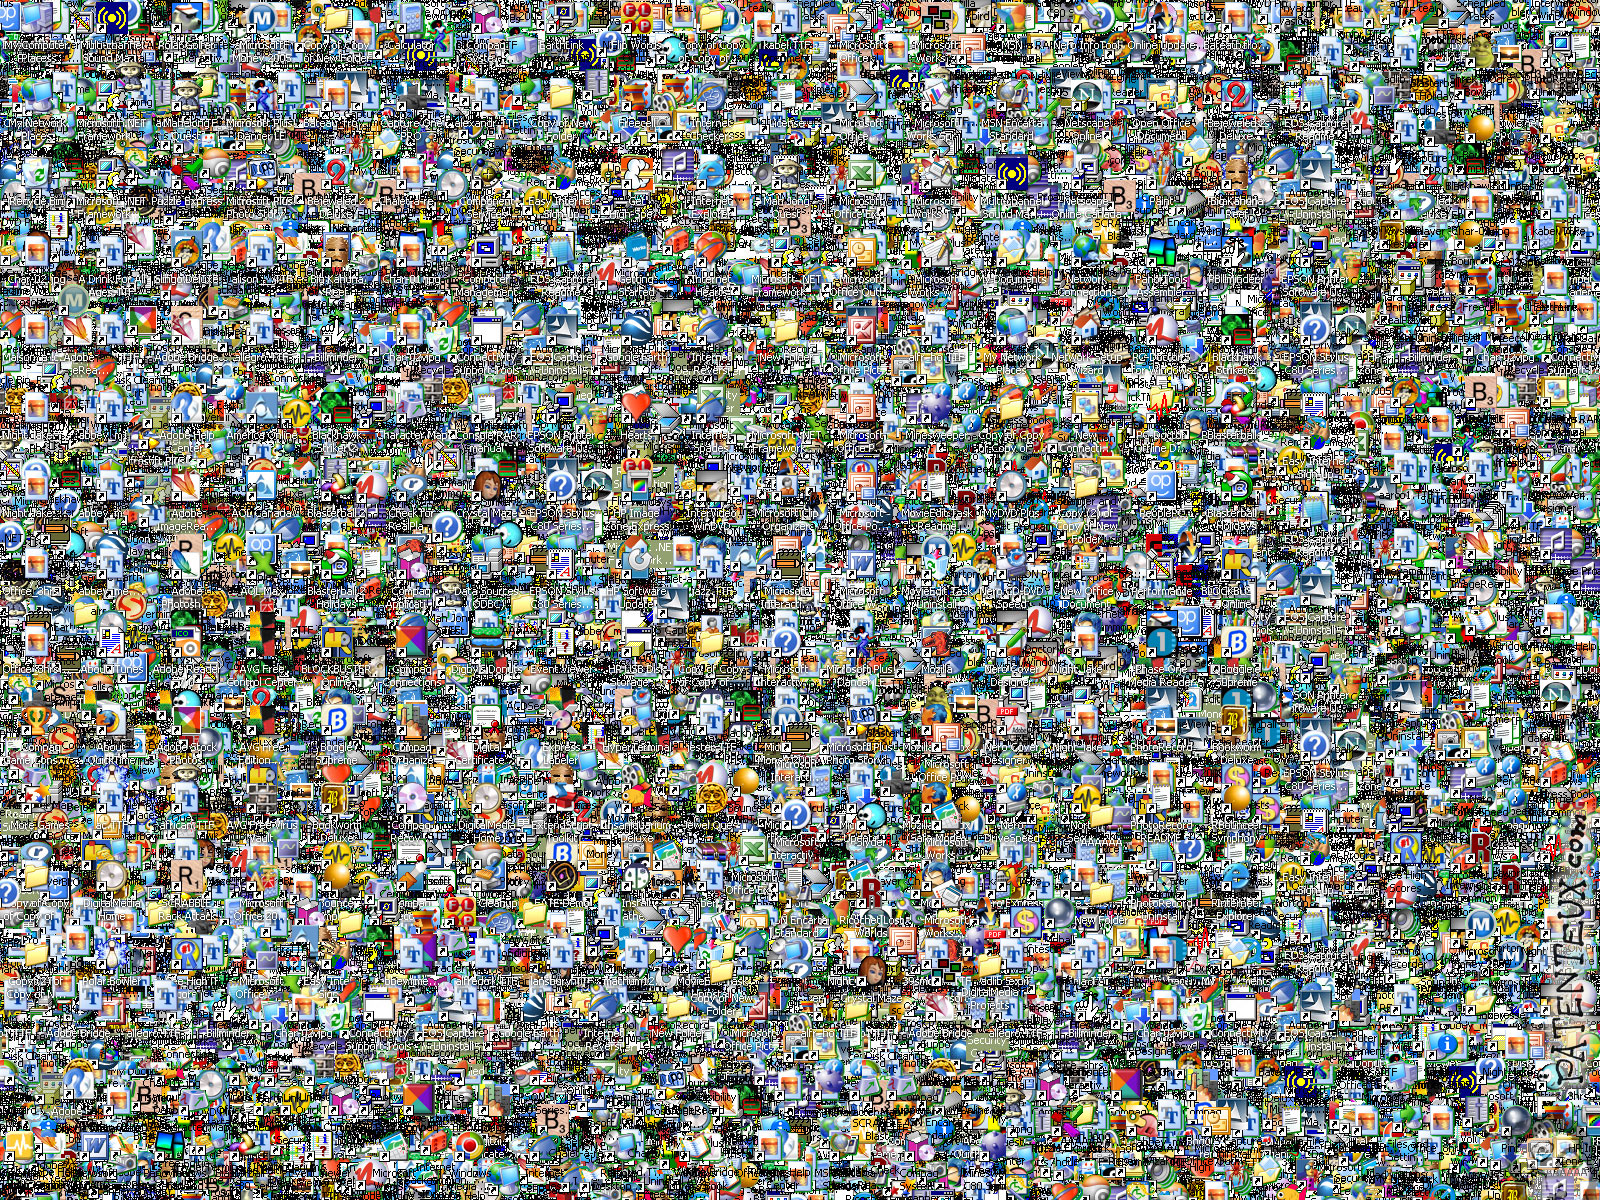 Art Mosaic Tile Collage Poster Resized By Ze Robot